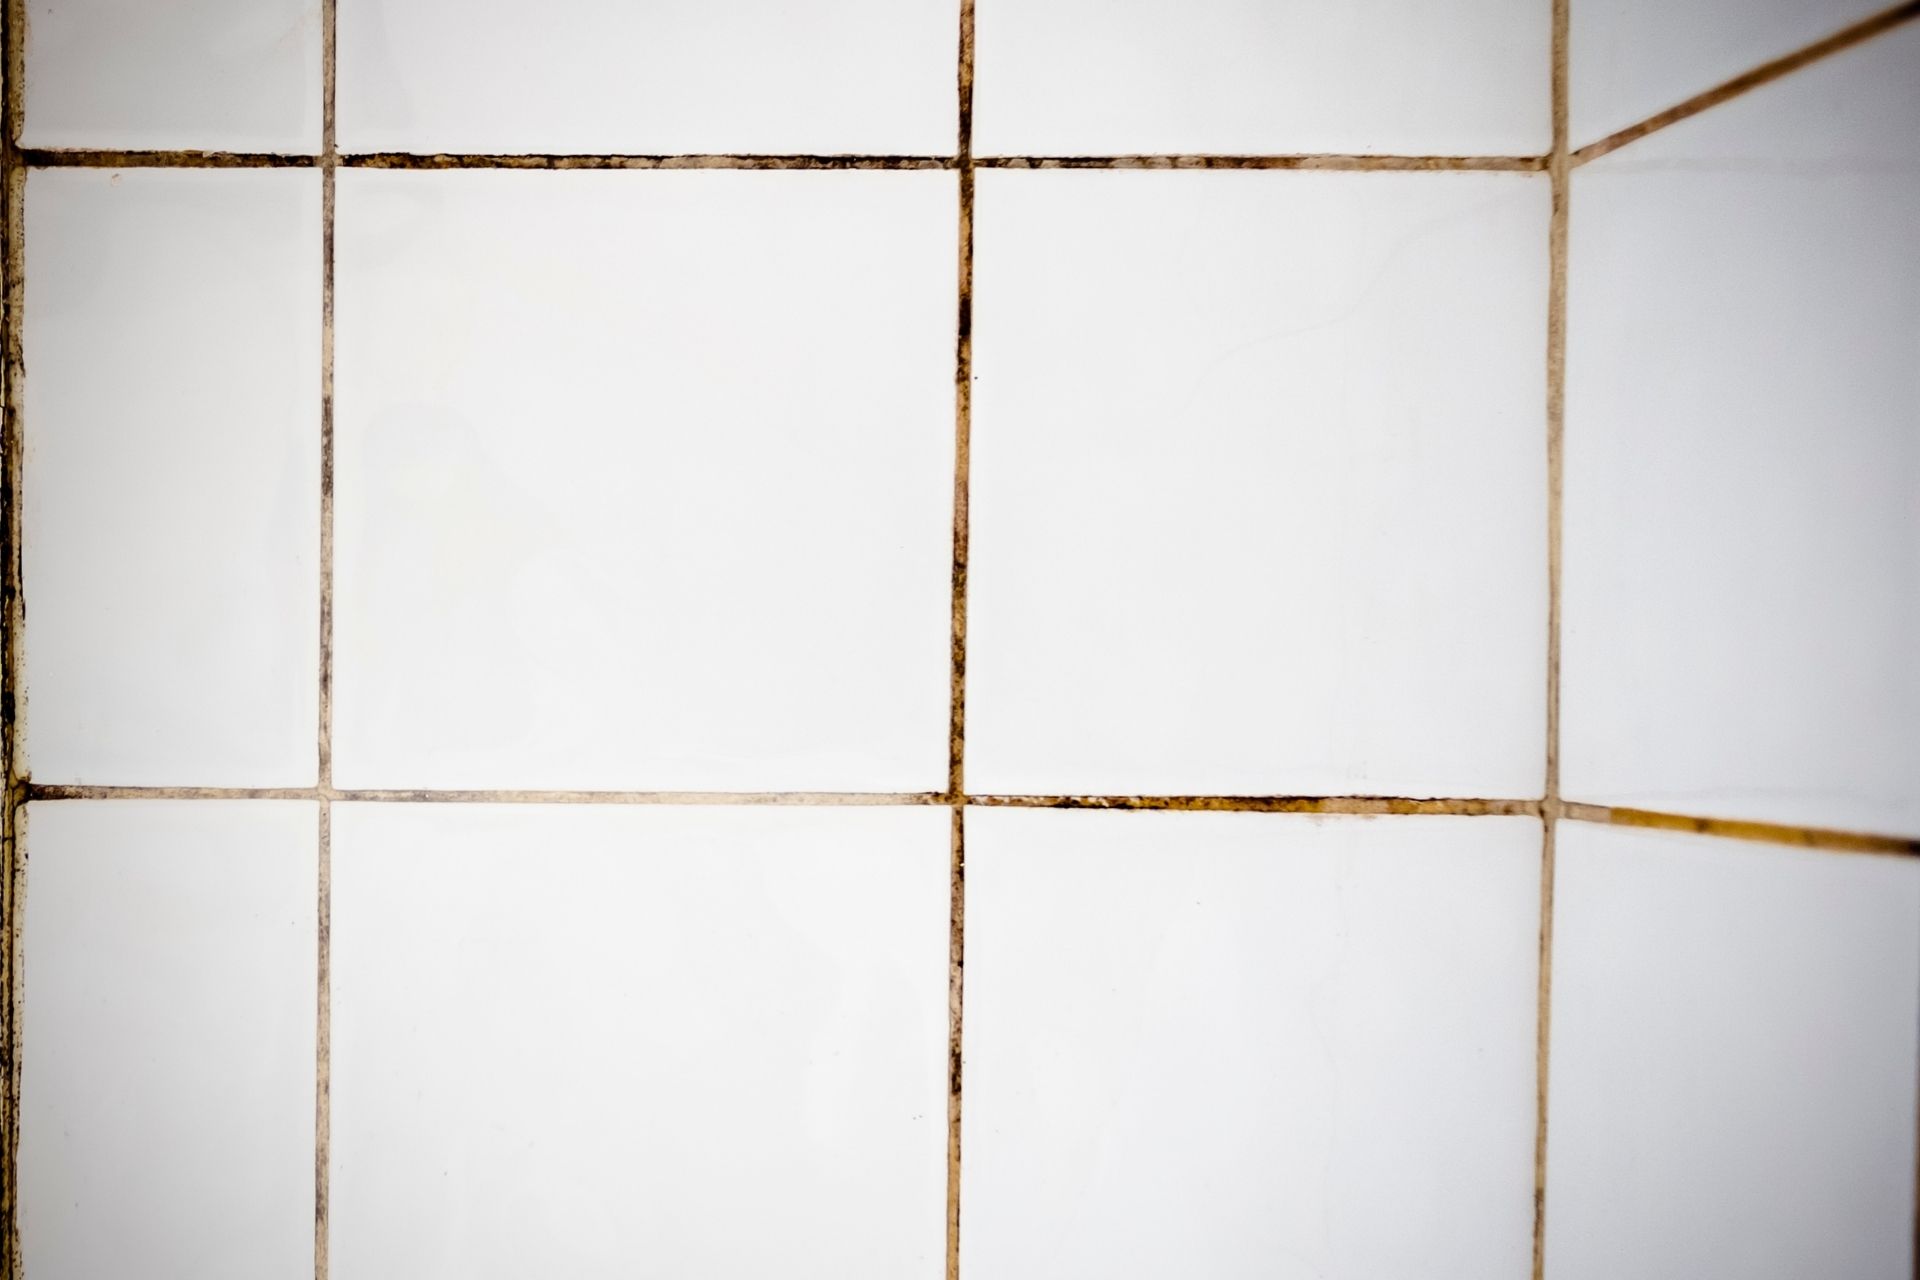 dirty grout lines in a shower